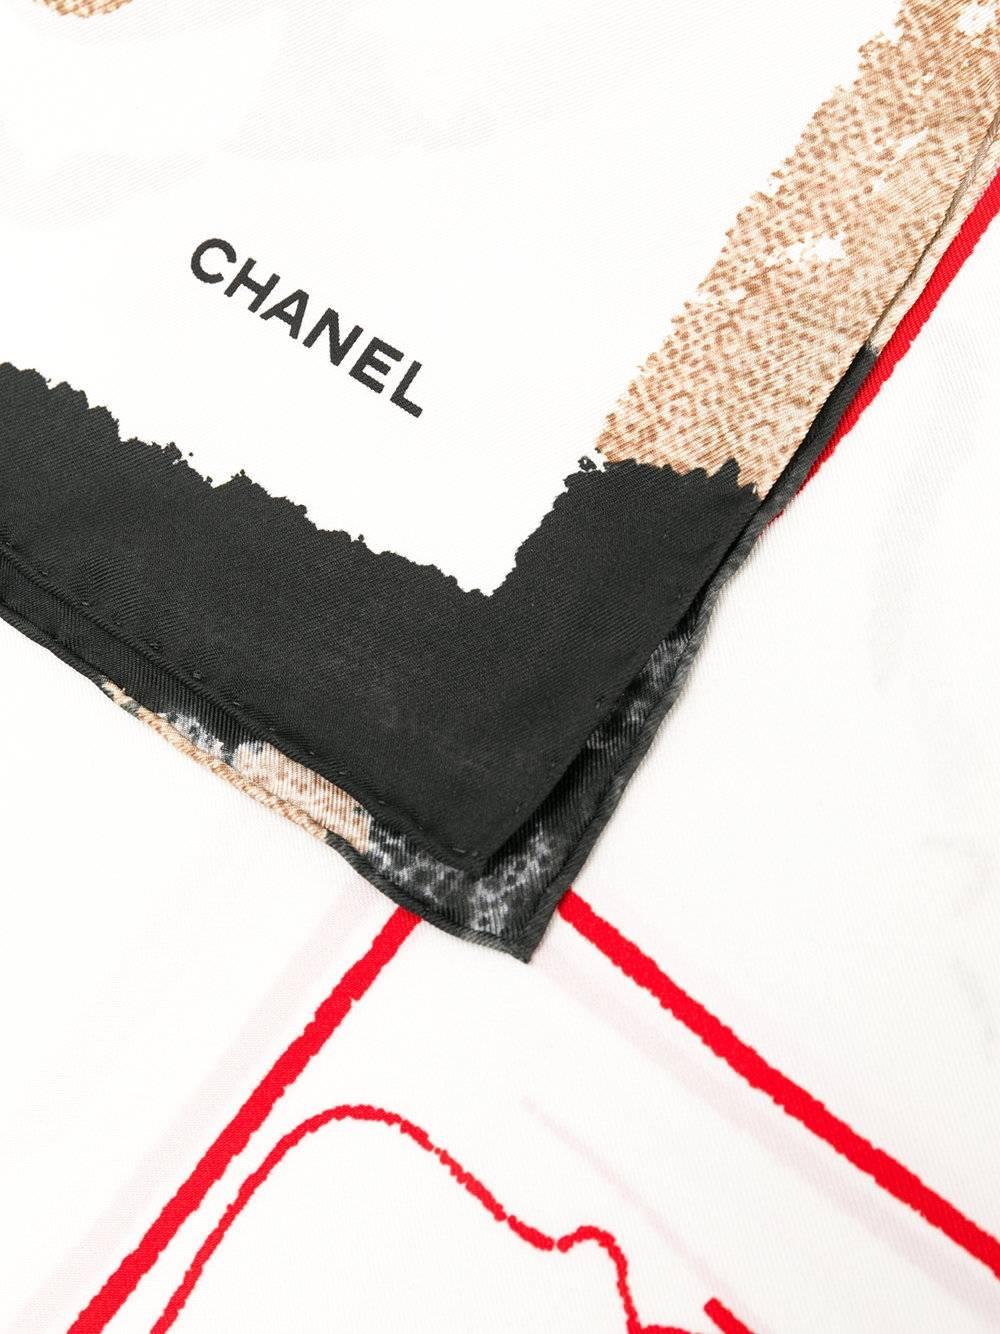 In a Parisian colour palette, this vintage Chanel scarf is spun from silk and a pattern of logos and camellias across its profile.

Colour: Cream/ Red/ Black/ Brown

Composition: 100% Silk

Size: 90cm x 87cm

Condition: 10/10